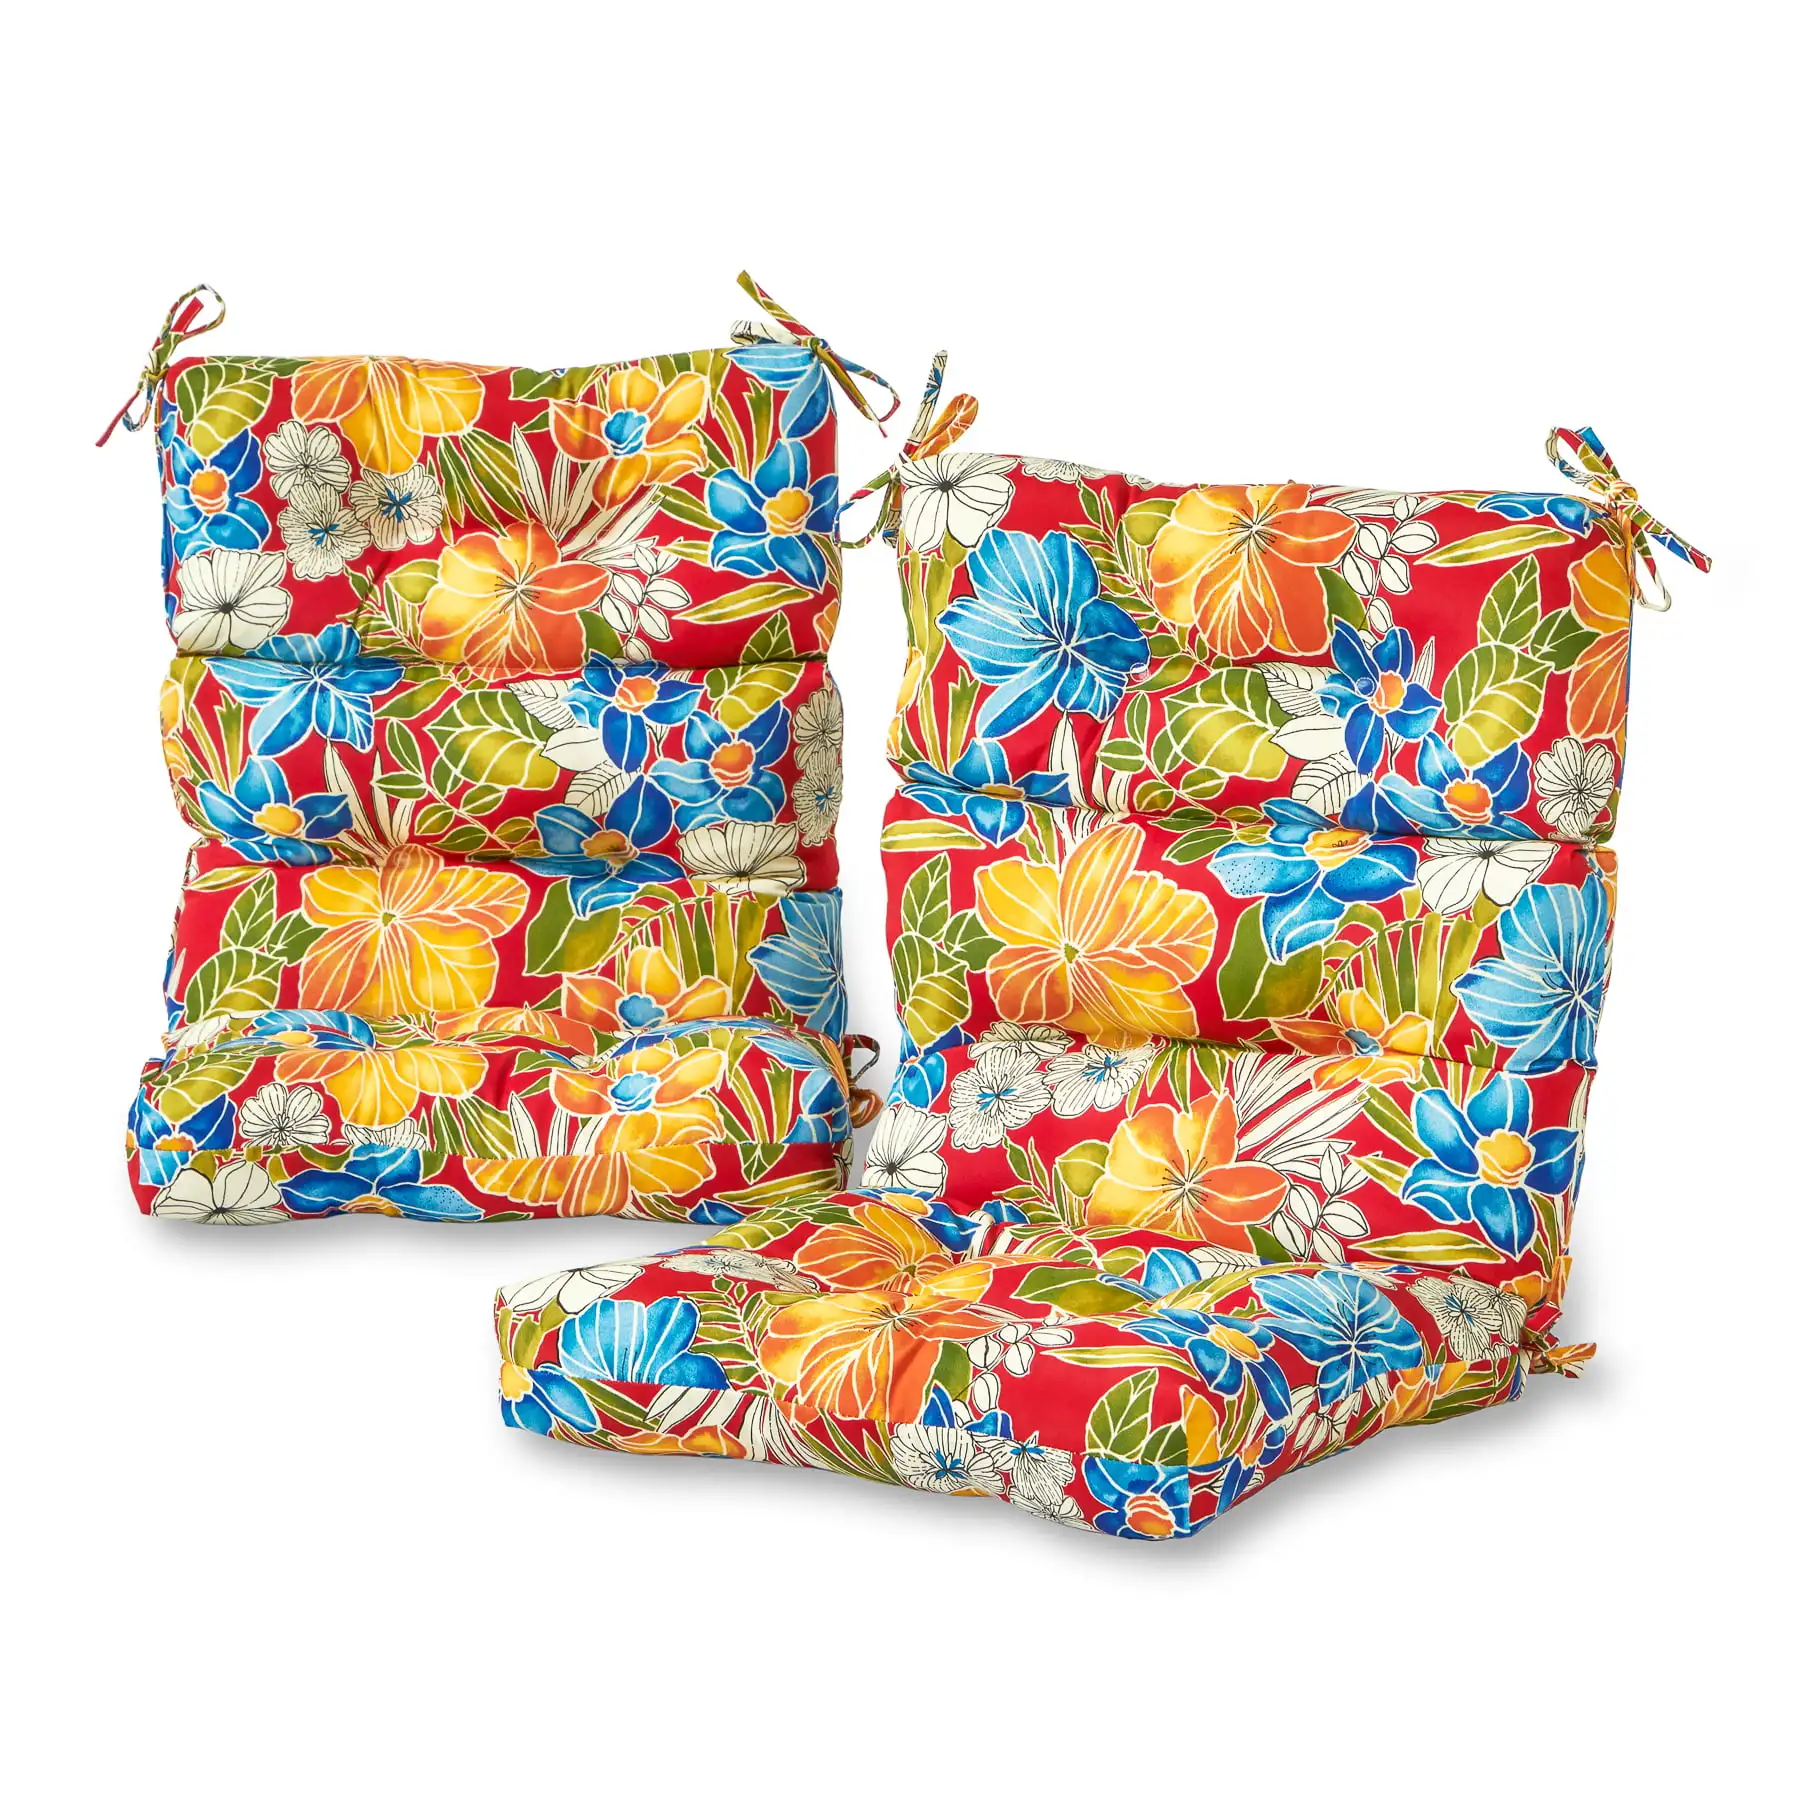 

Greendale Home Fashions 44 X 22 In. Outdoor High Back Chair Cushion - Prints - Set of 2